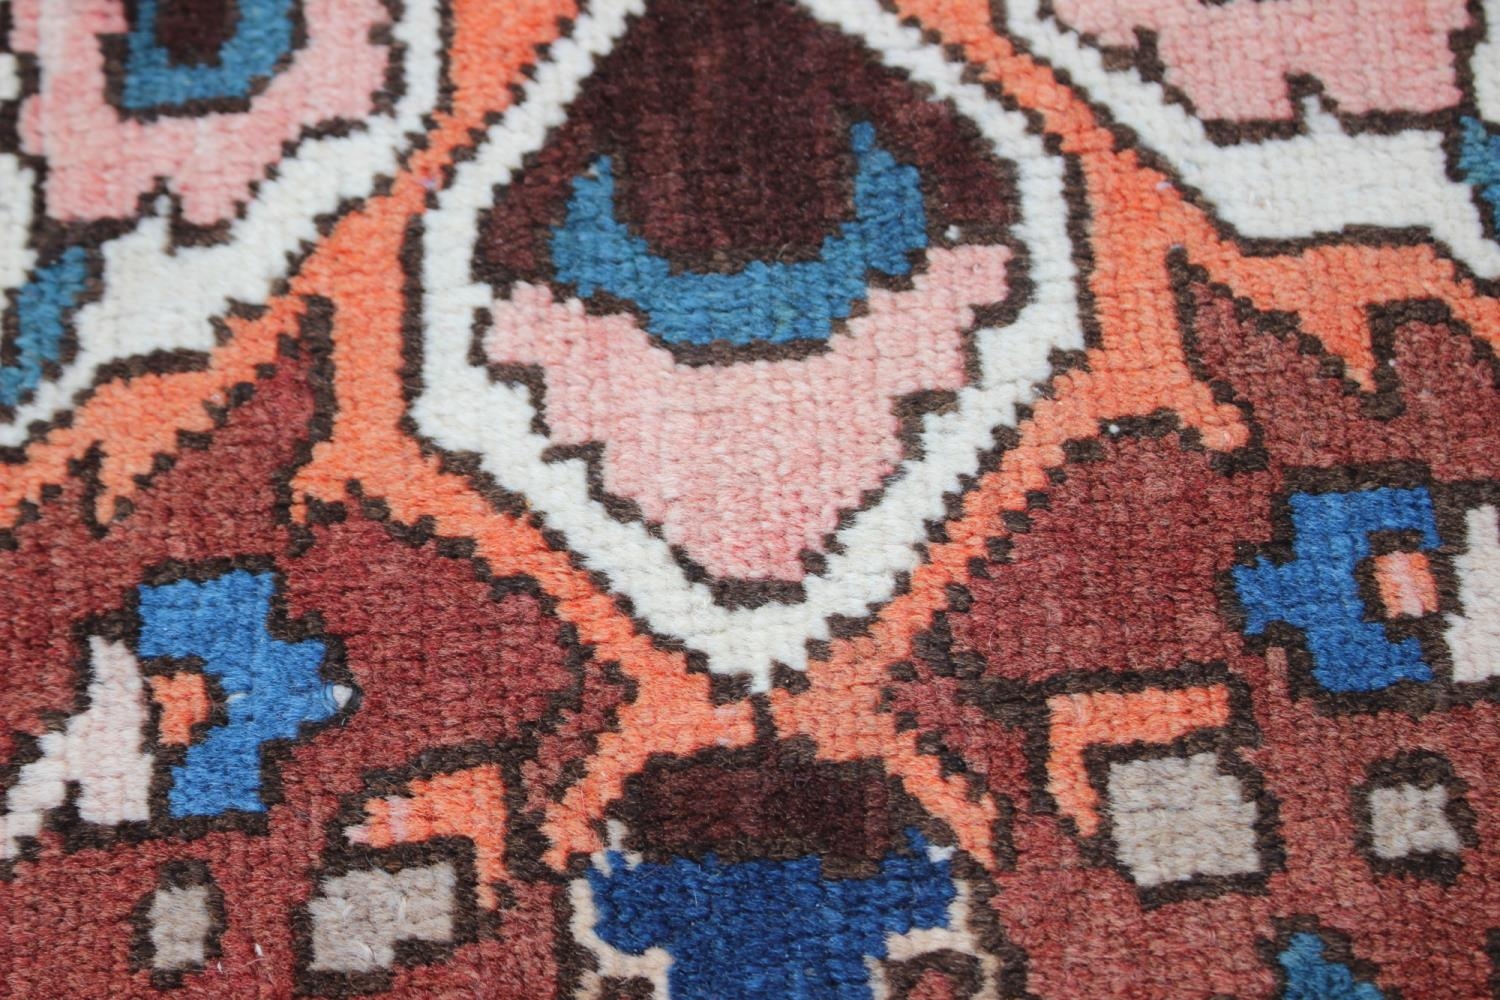 A Hamadan carpet with central star design, on a salmon ground, in shades of blue, brown, pink, - Image 8 of 14